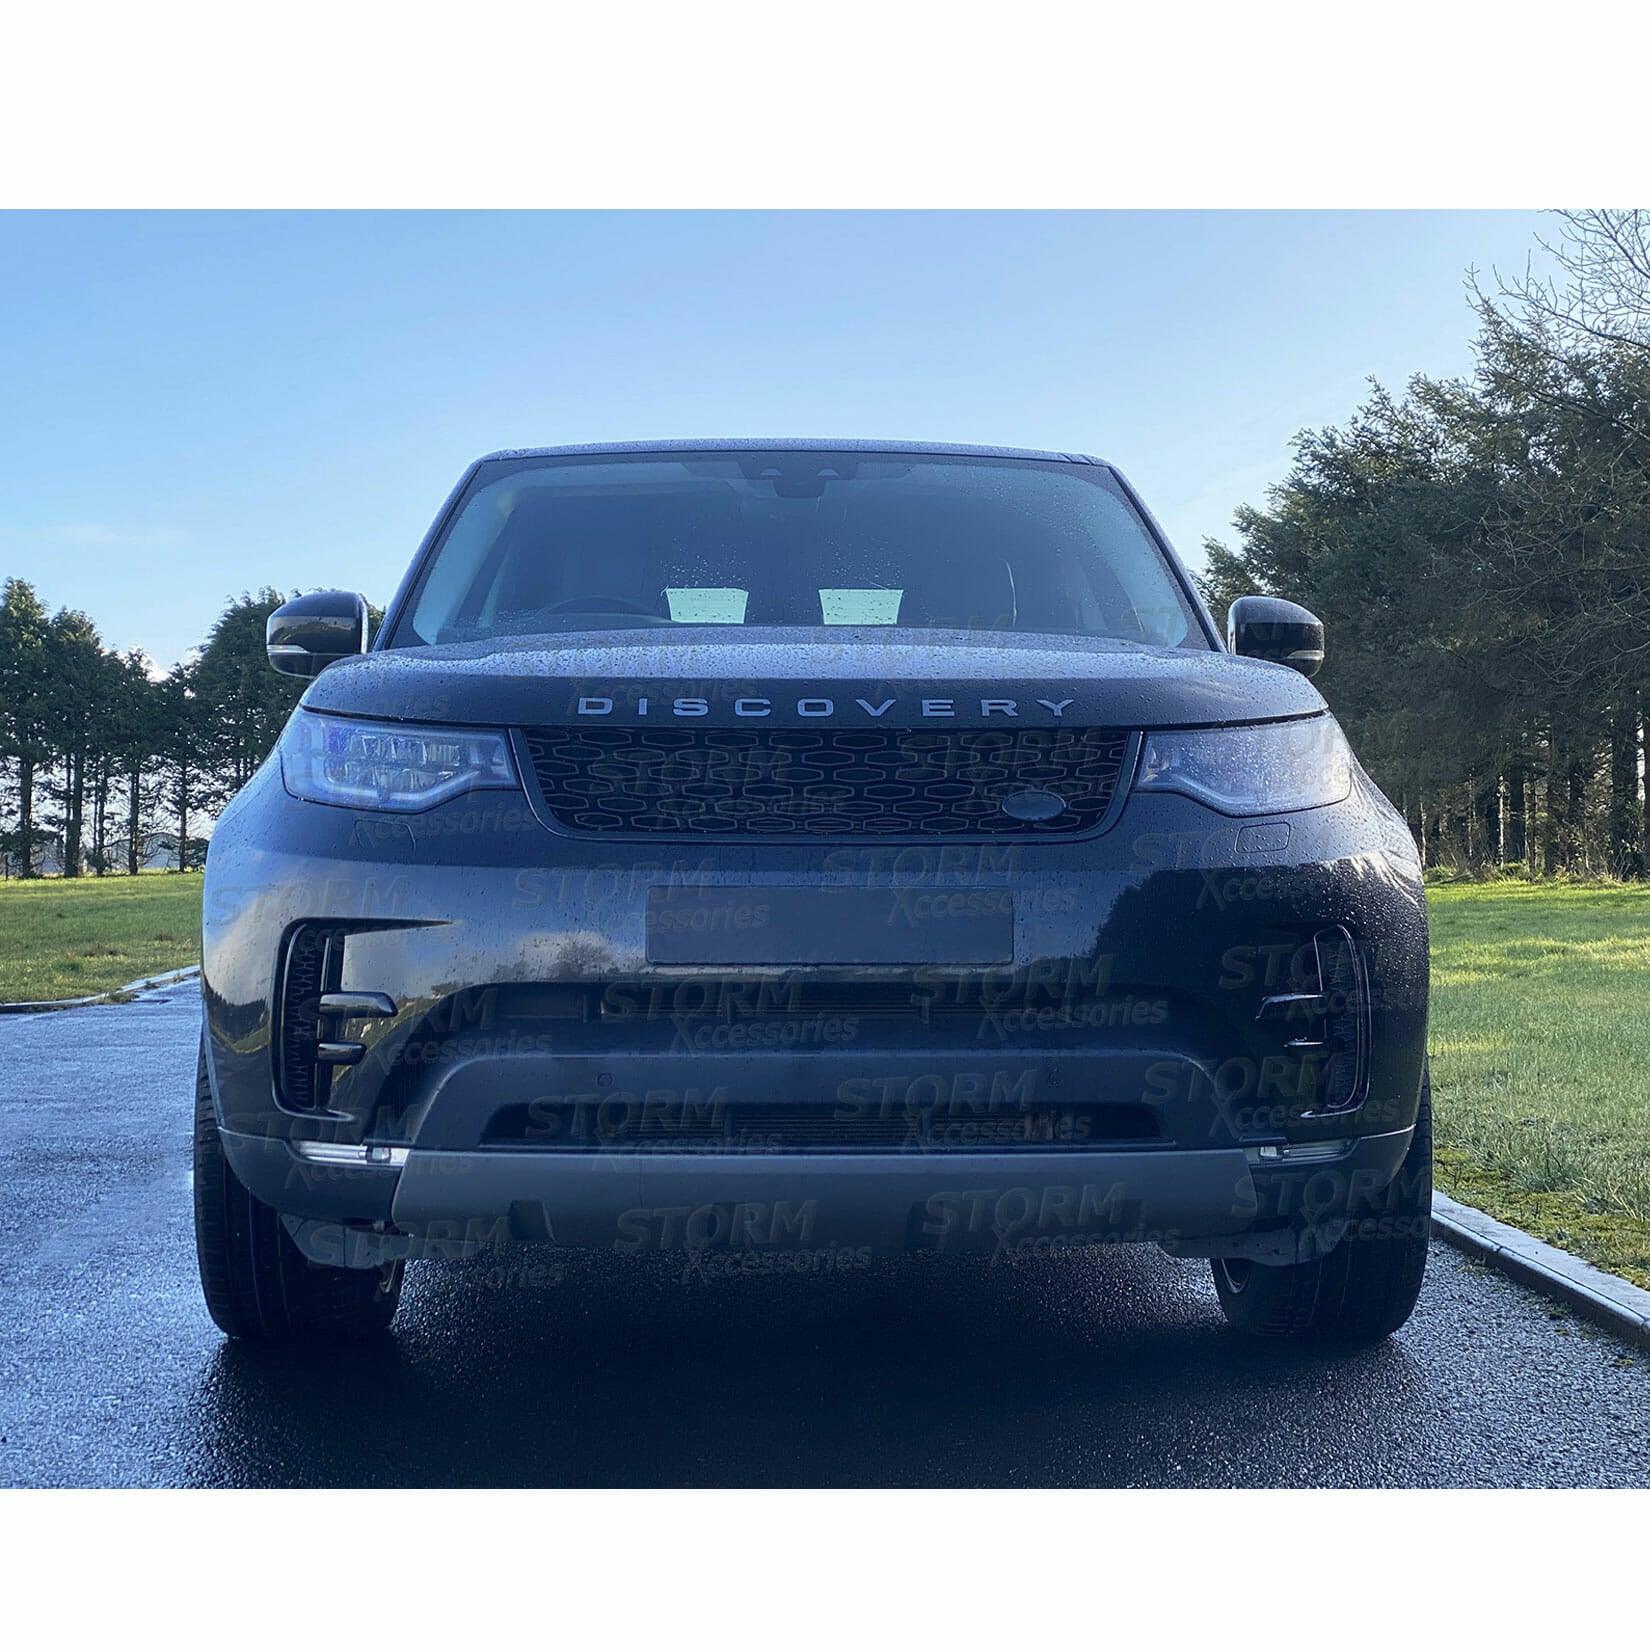 LAND ROVER DISCOVERY 5 - DYNAMIC BLACK EDITION BODY KIT - GRILLE, SIDE VENTS, TRIMS, TOW EYE AND EXHAUST COVERS - Storm Xccessories2